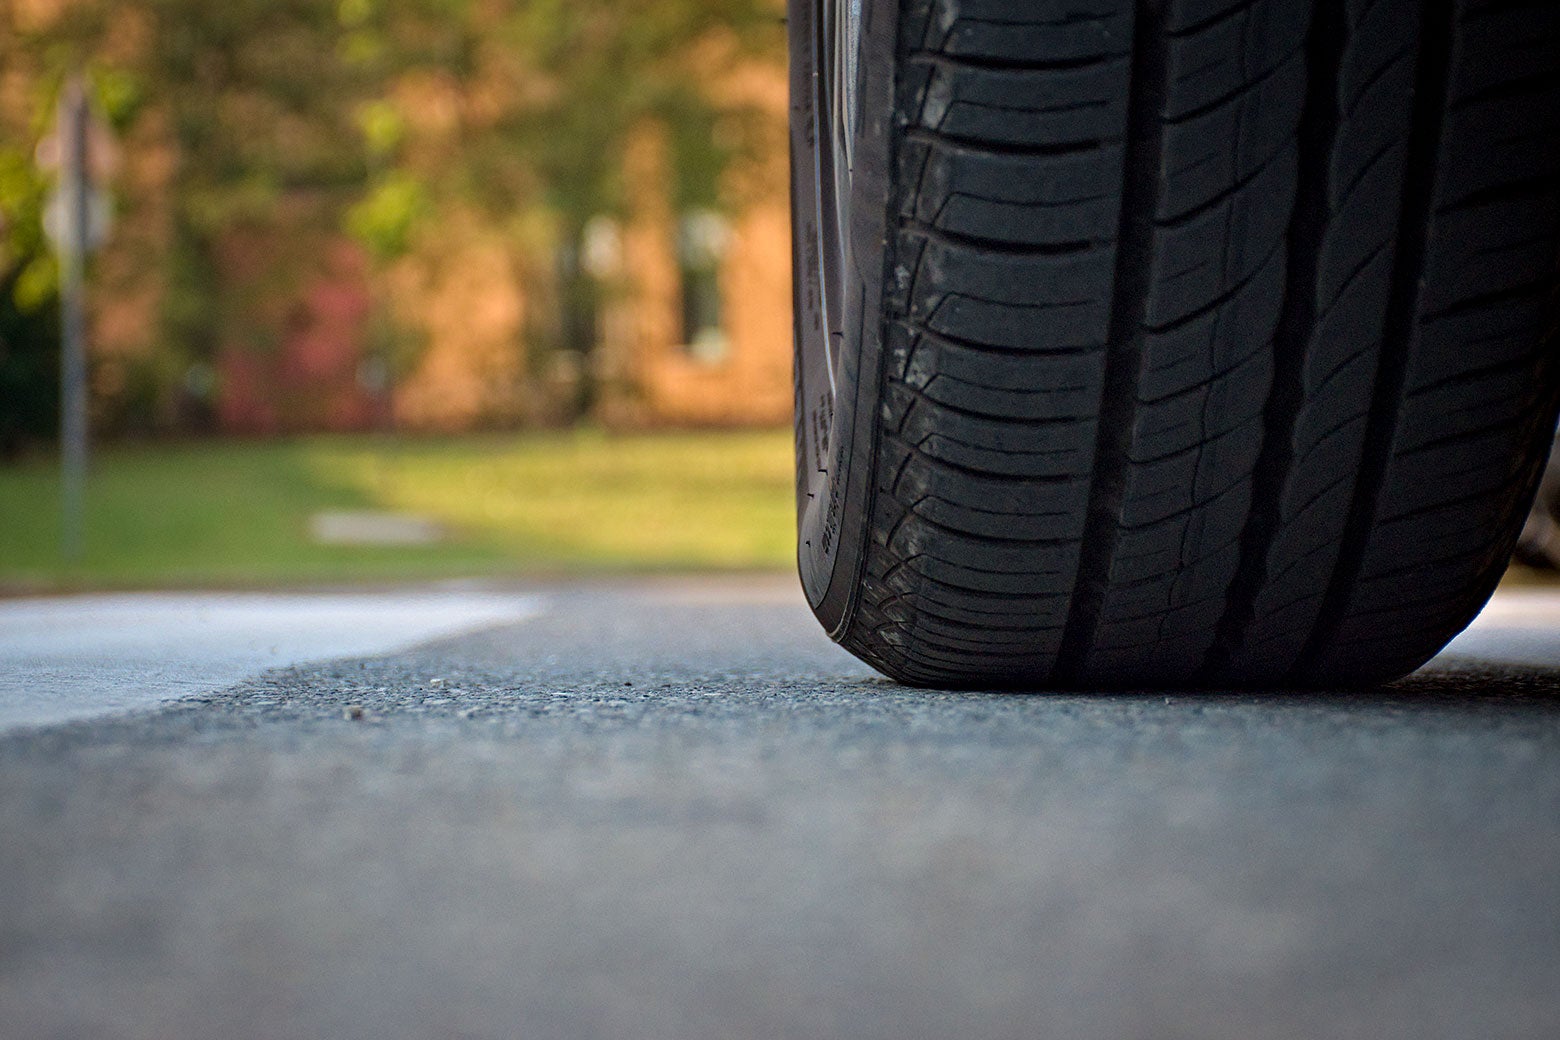 There’s a Big Problem With Your Car’s Tires